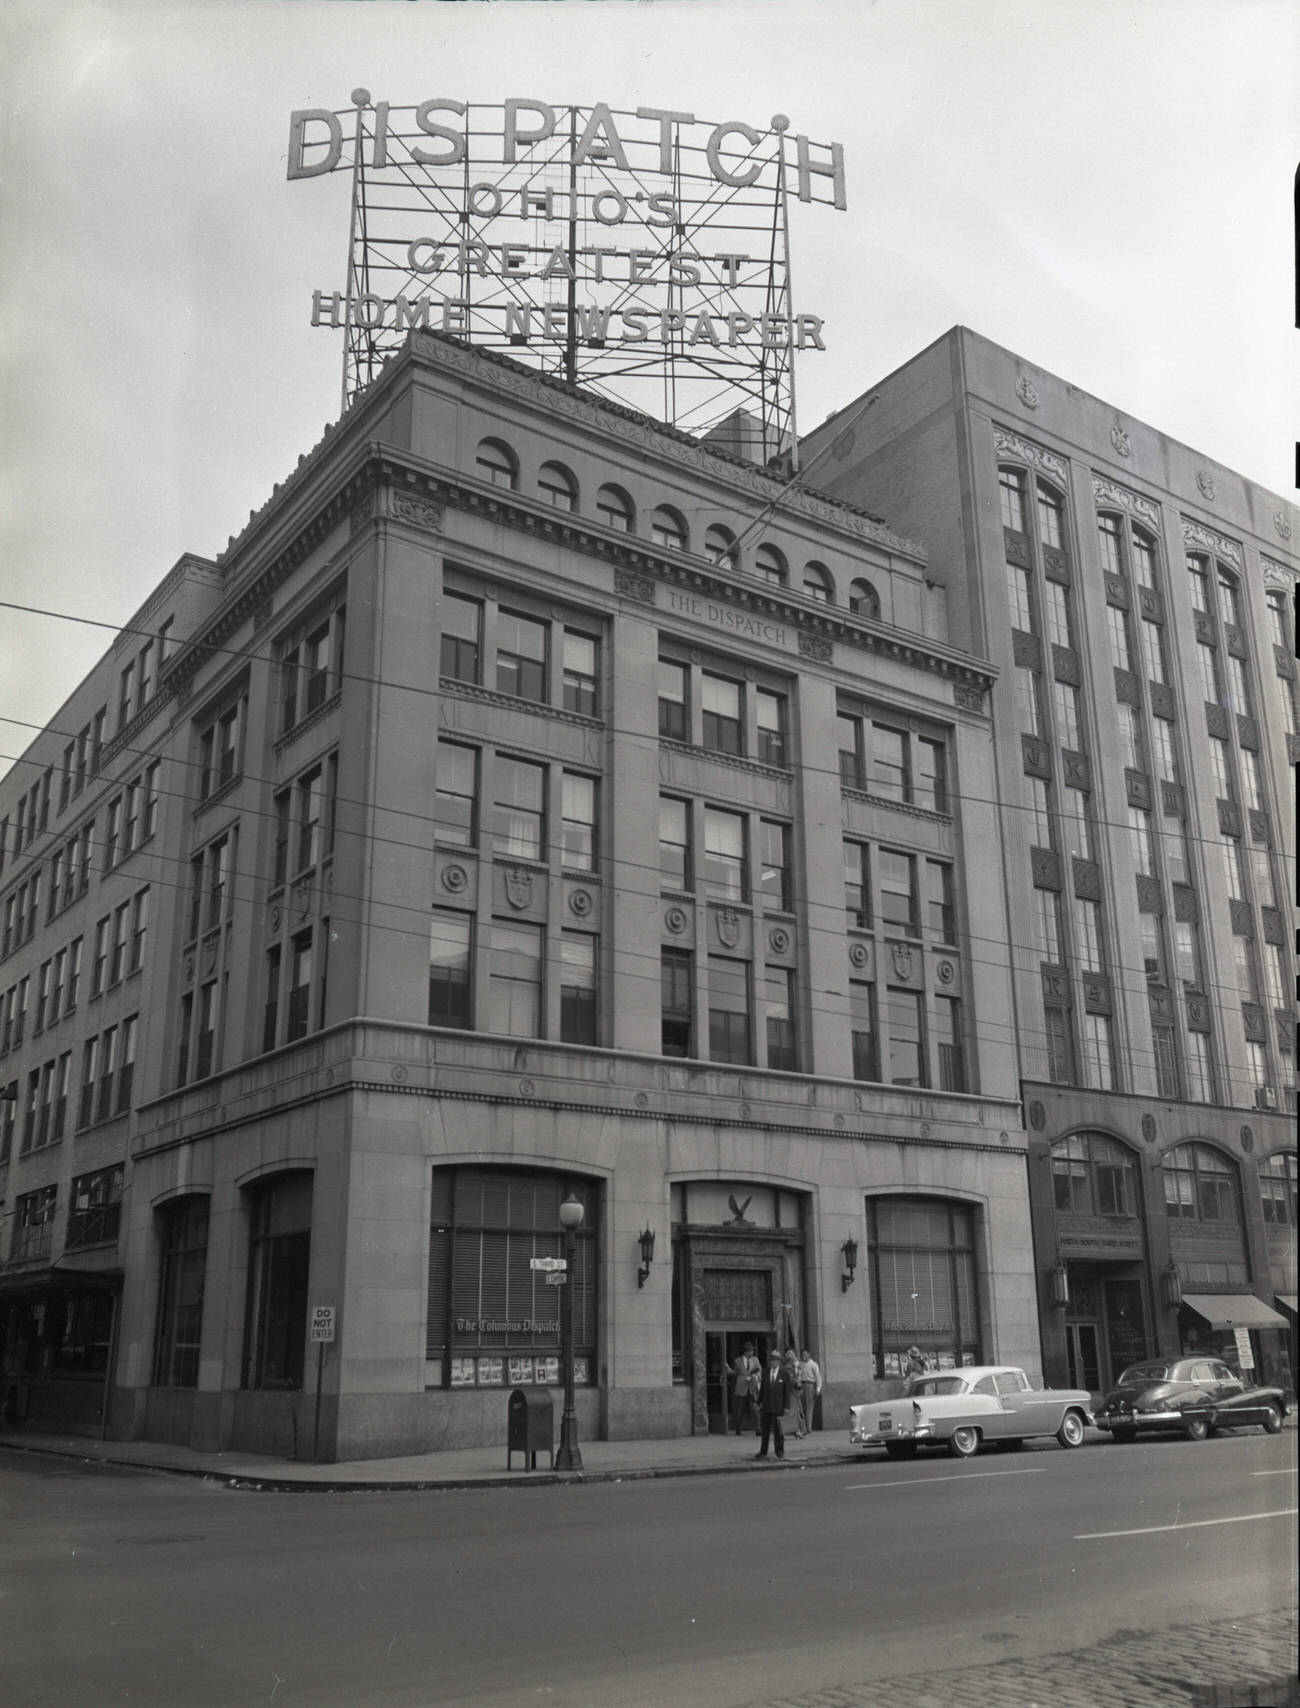 Columbus Dispatch headquarters, opened on this site on November 23, 1925, photograph from 1955.